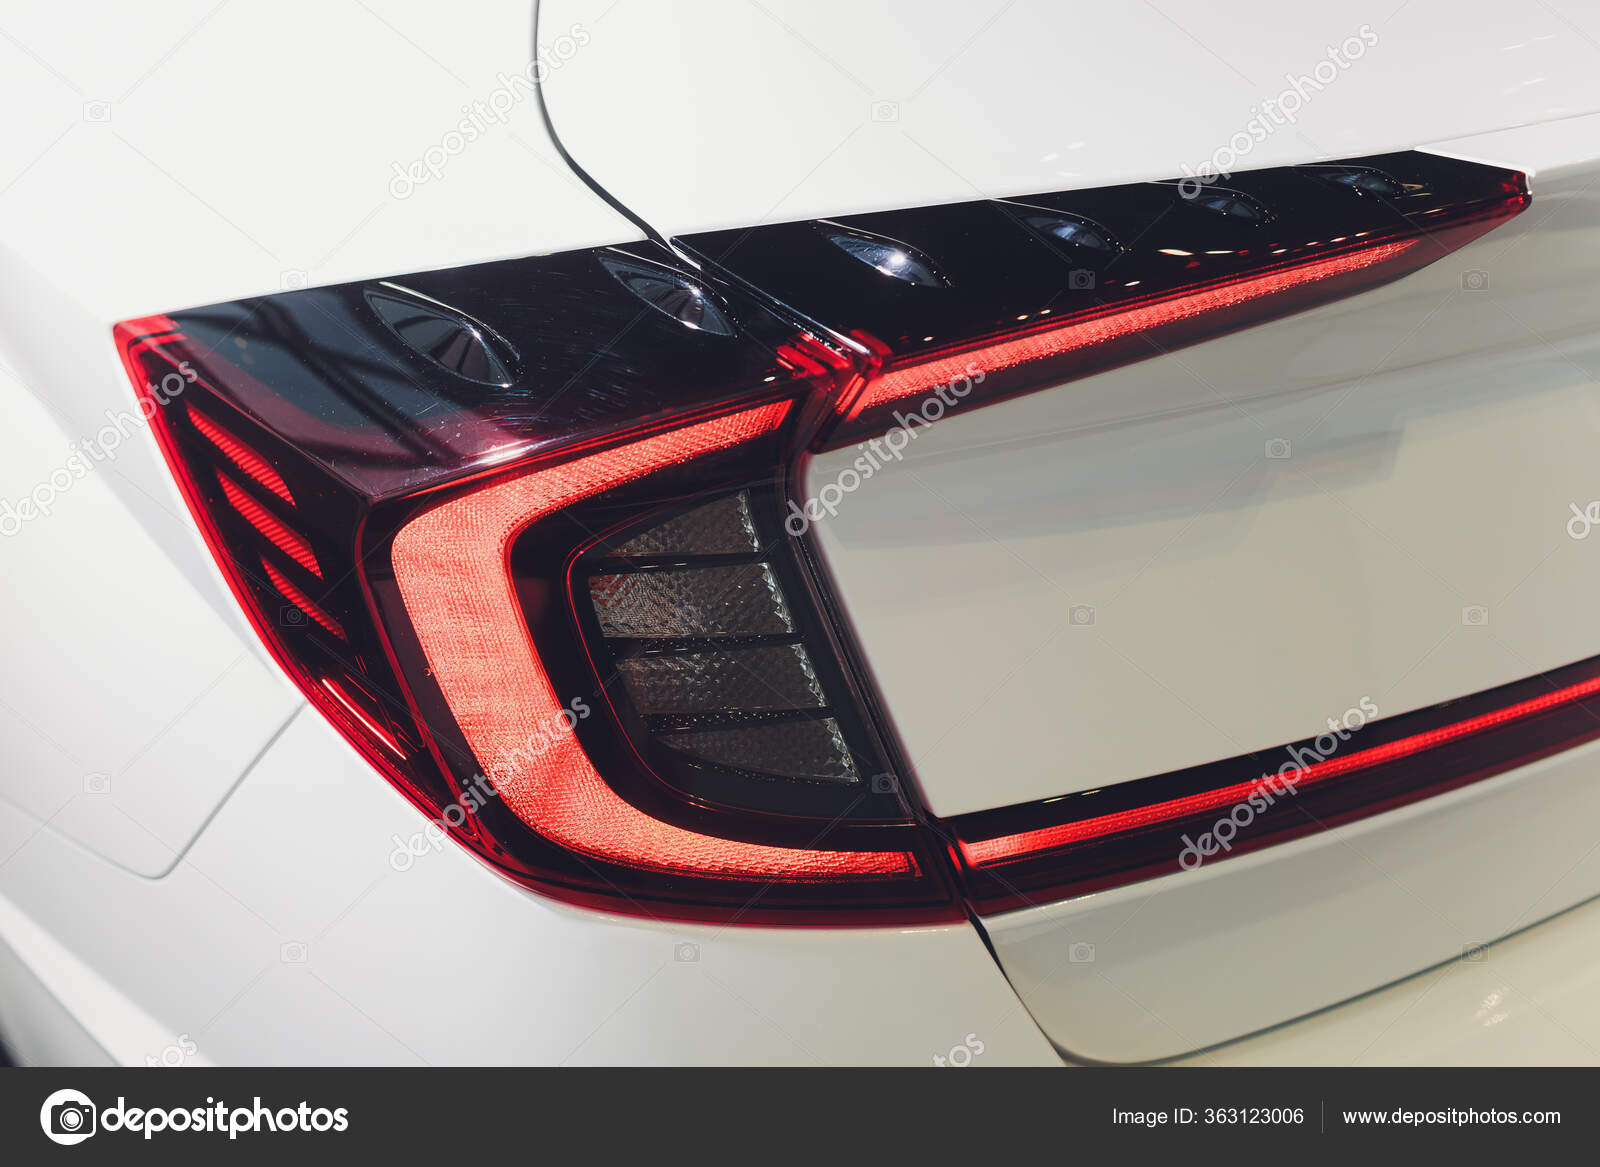 Car Tail Lights - Car Rear Lights Latest Price, Manufacturers & Suppliers